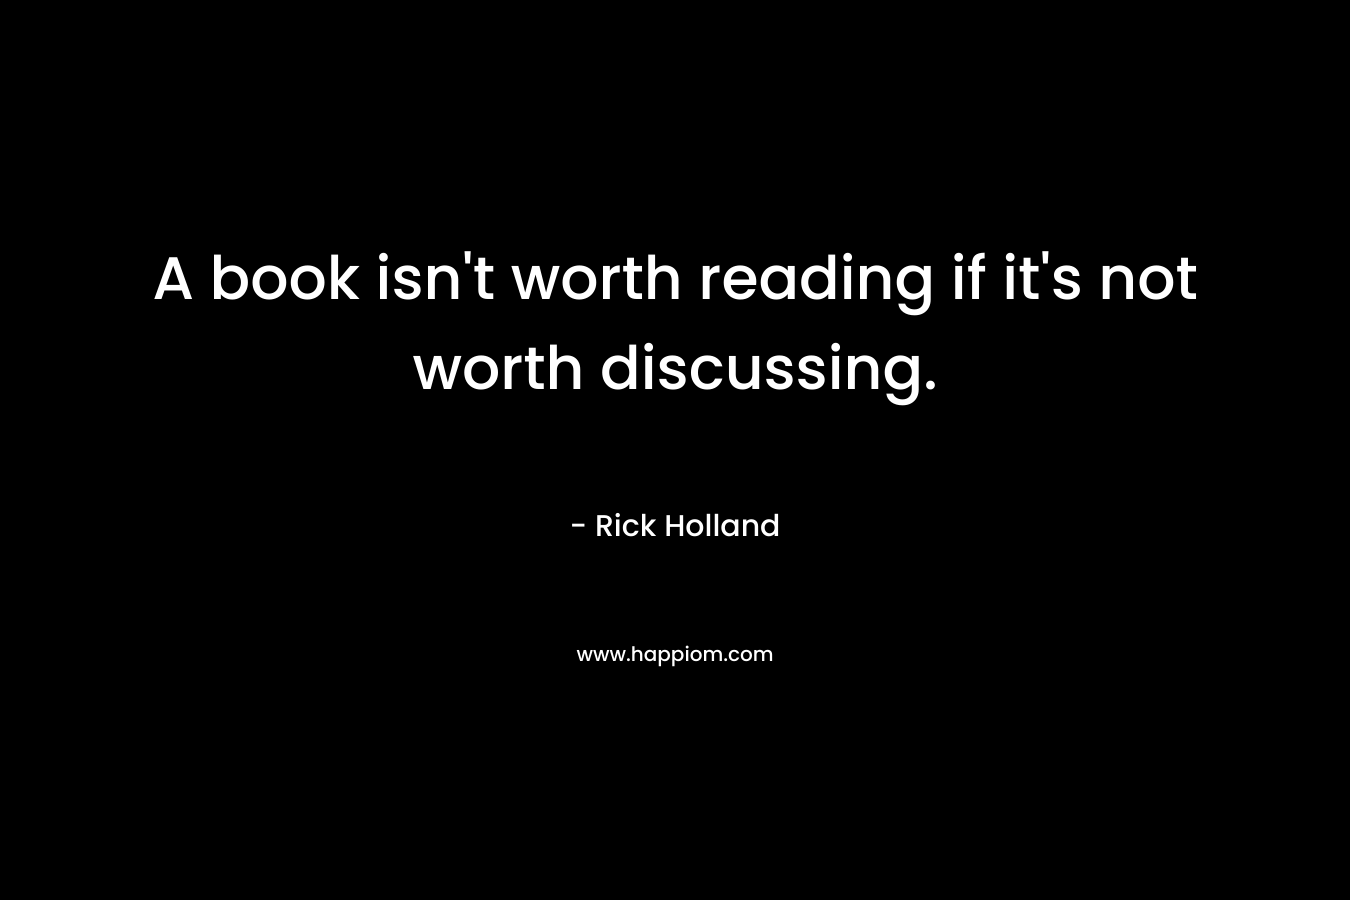 A book isn’t worth reading if it’s not worth discussing. – Rick Holland